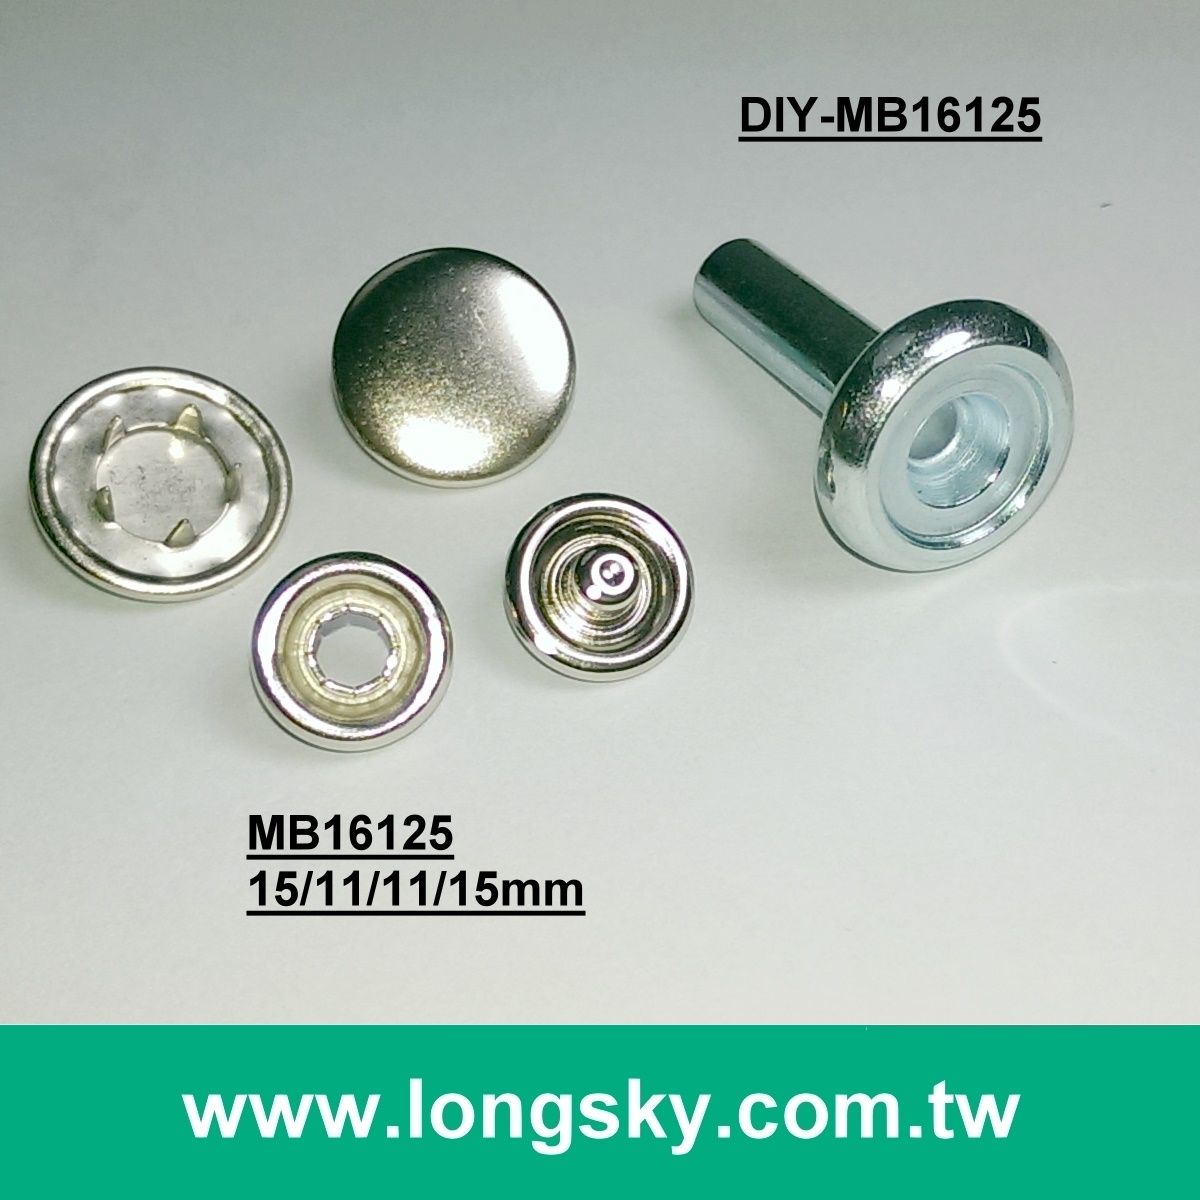 (#MB16125) DIY tooling available, 15mm round brass metal top prong snap button